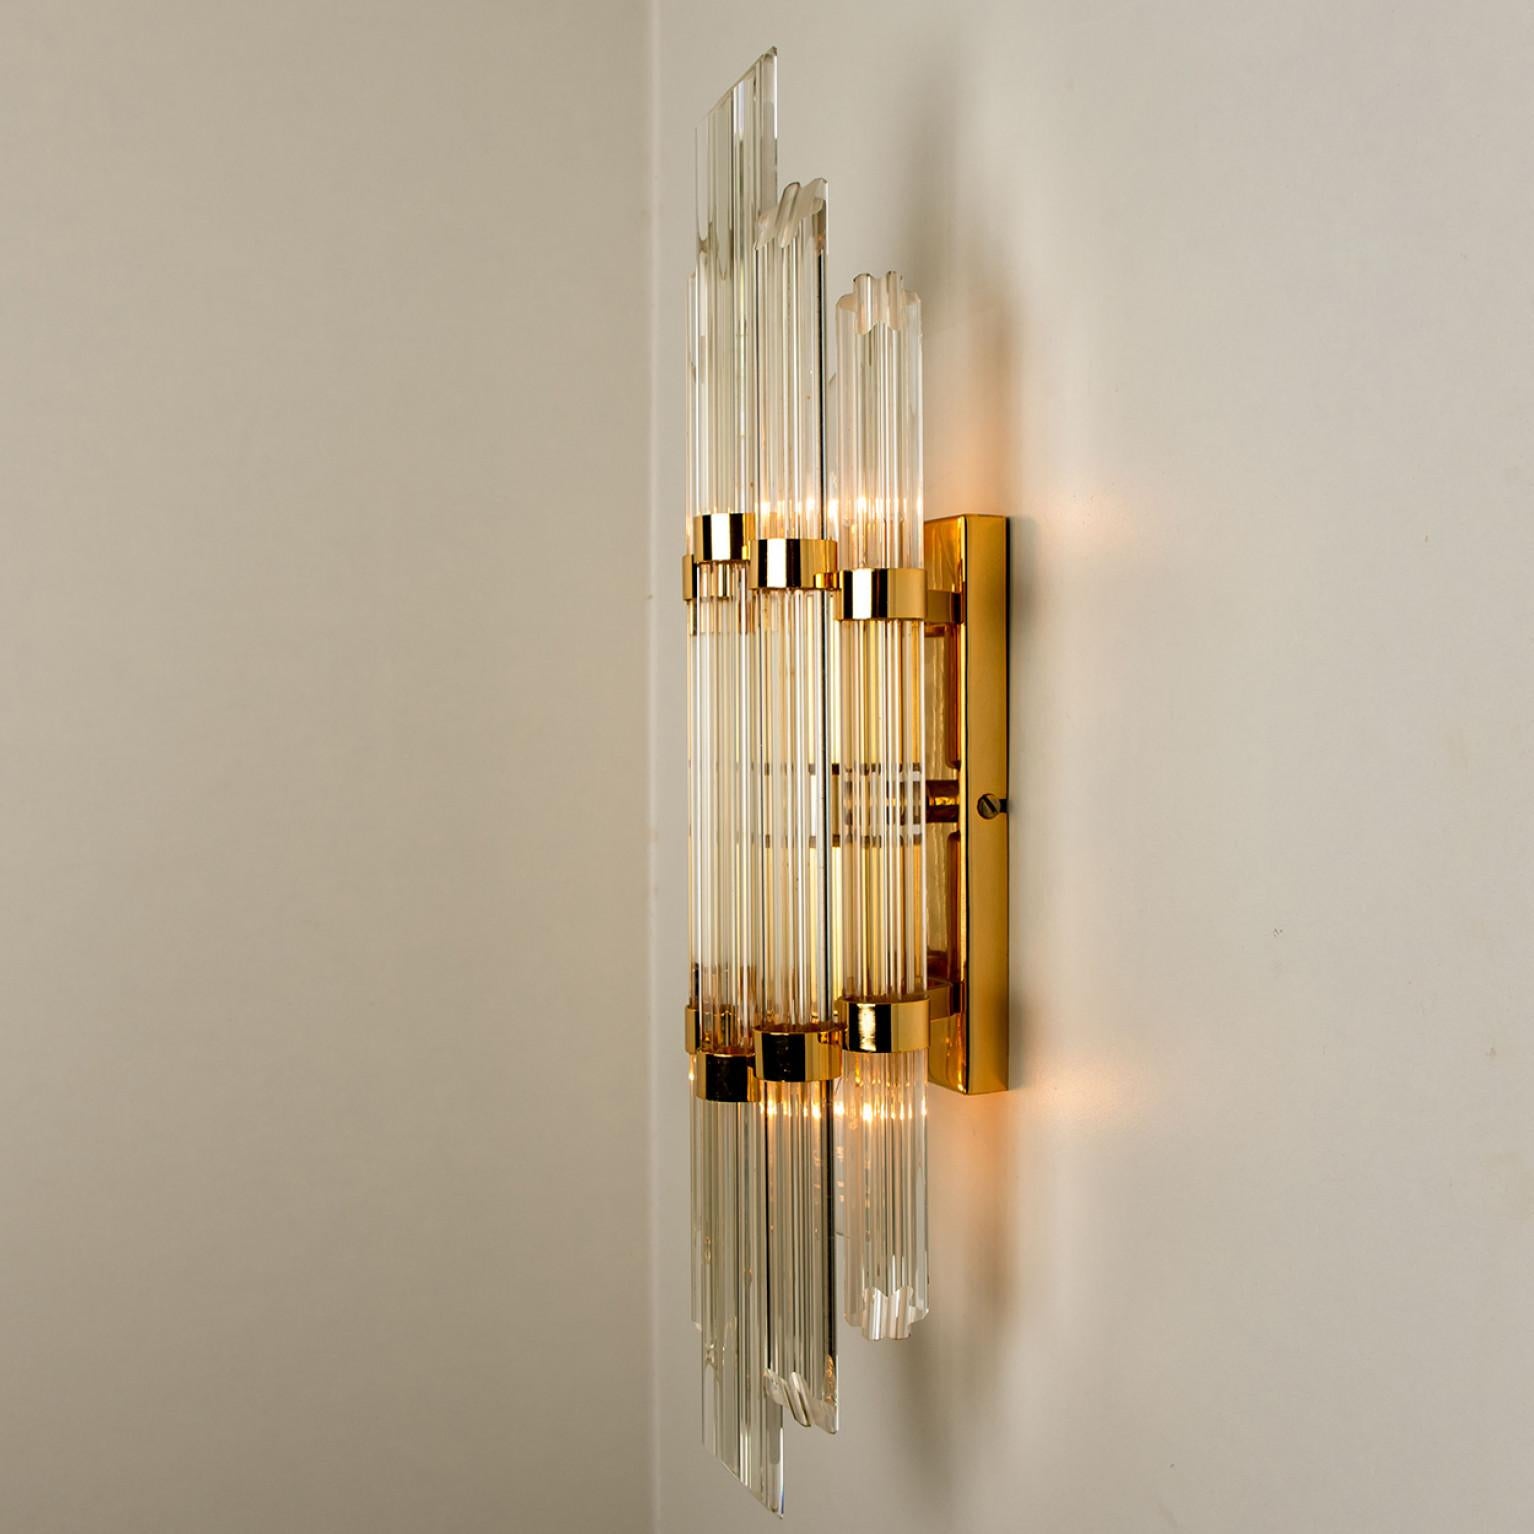 Mid-20th Century Modern Flower Shaped Glass Rod Wall Sconces in style of Sciolari For Sale